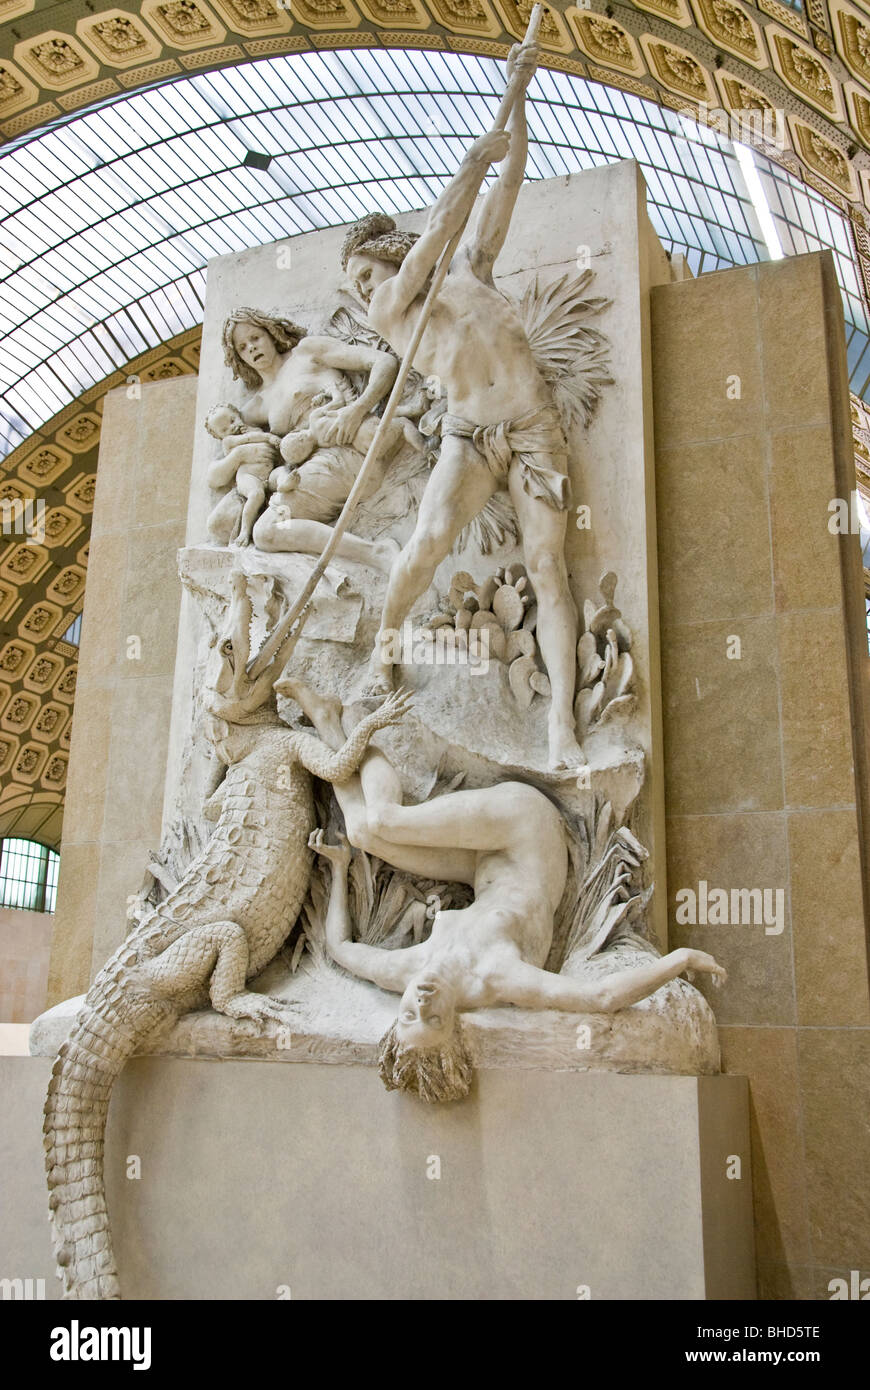 Paris, France, French Monuments, Art Museum, Musee d'Orsay, French Sculpture on Display 'The Alligator Hunters' Stock Photo